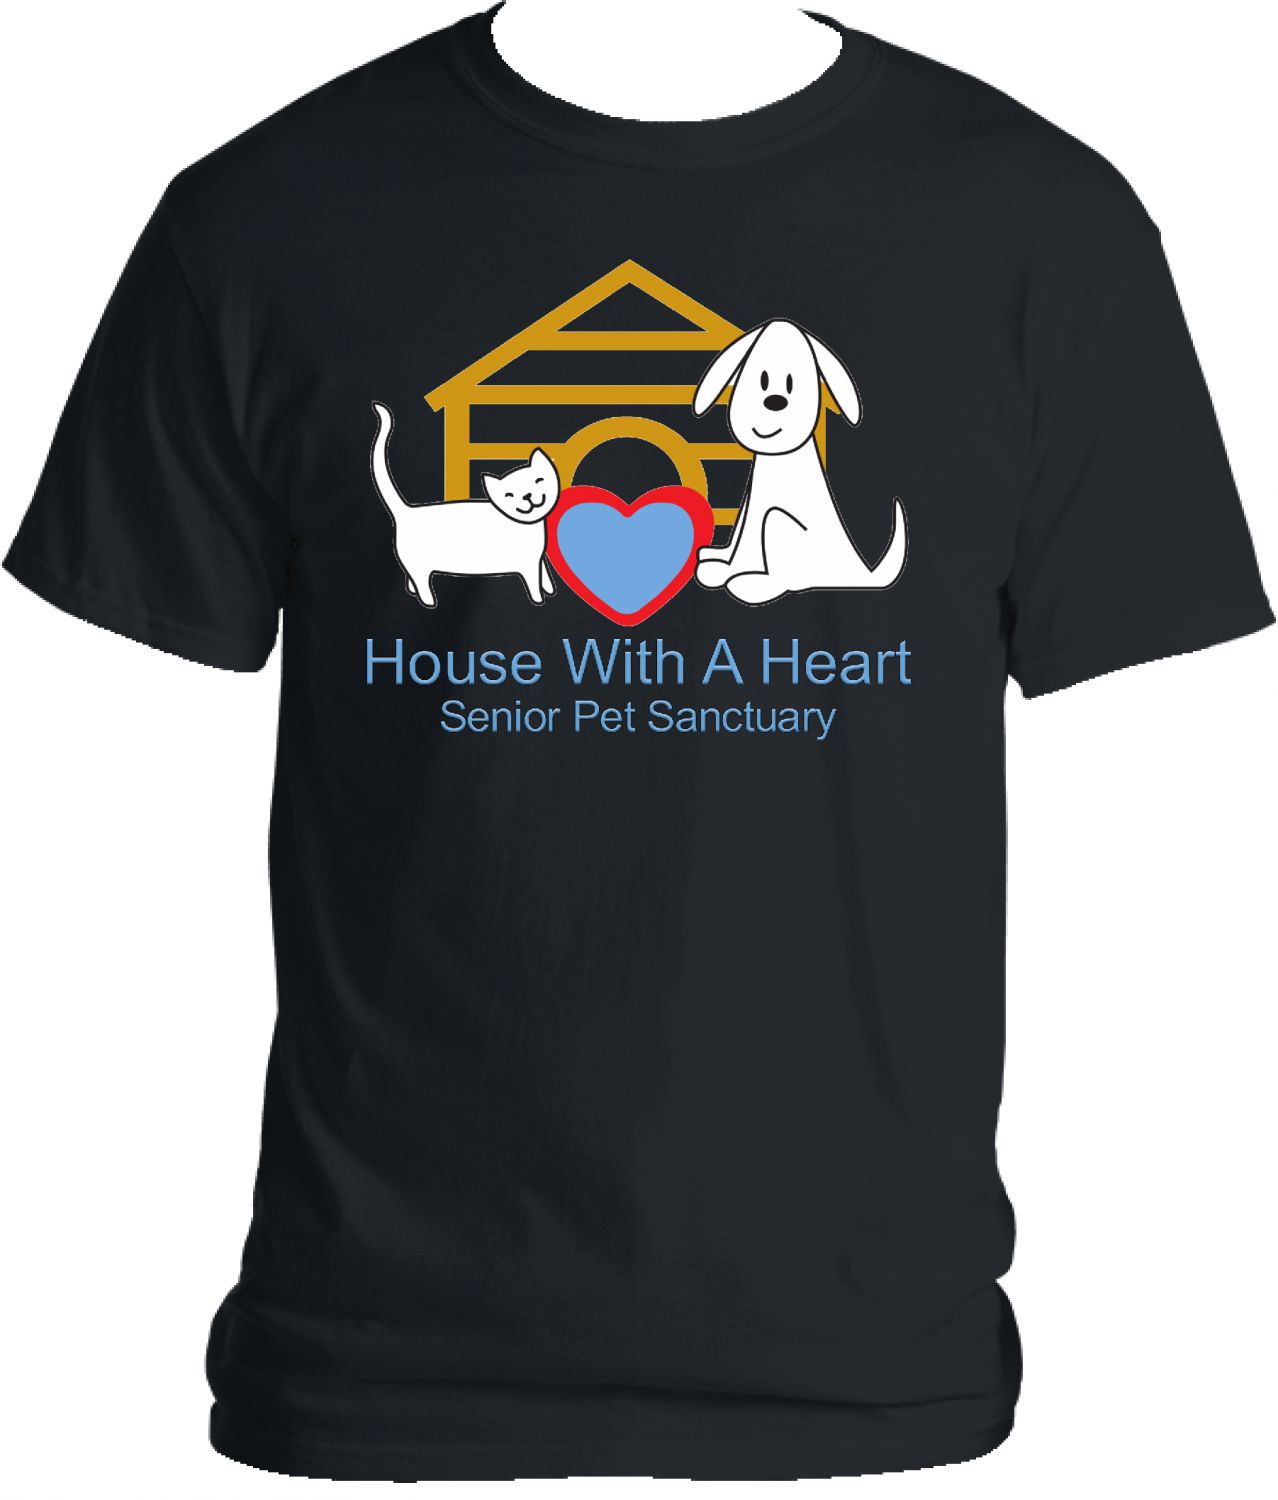 House with a Heart T-shirt